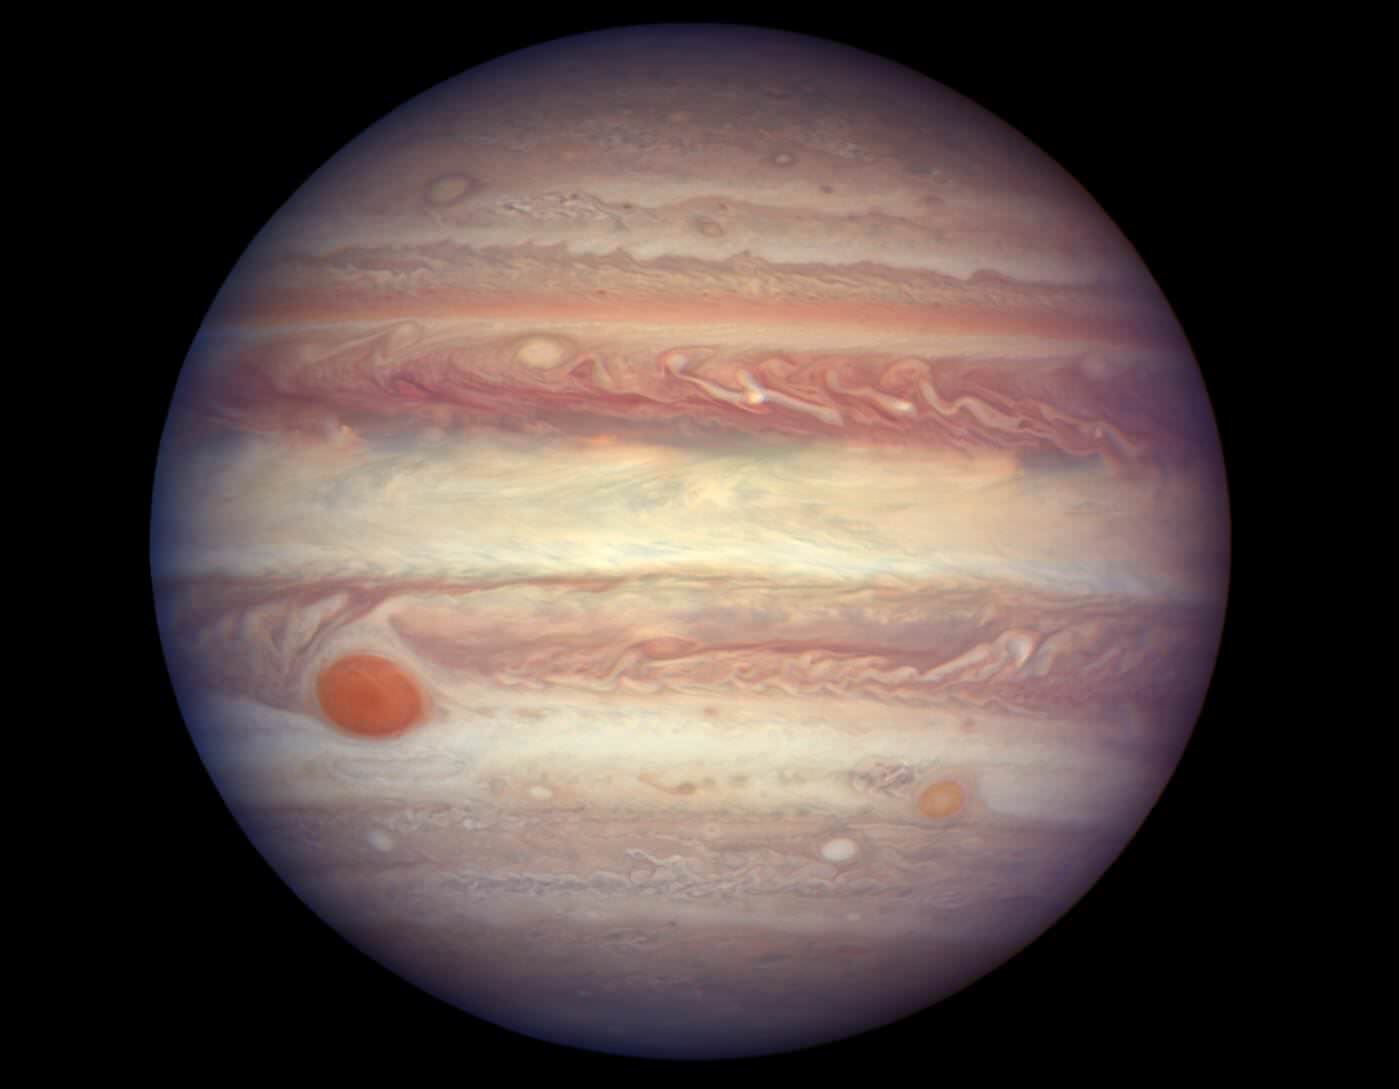 How much gravity does Jupiter have?